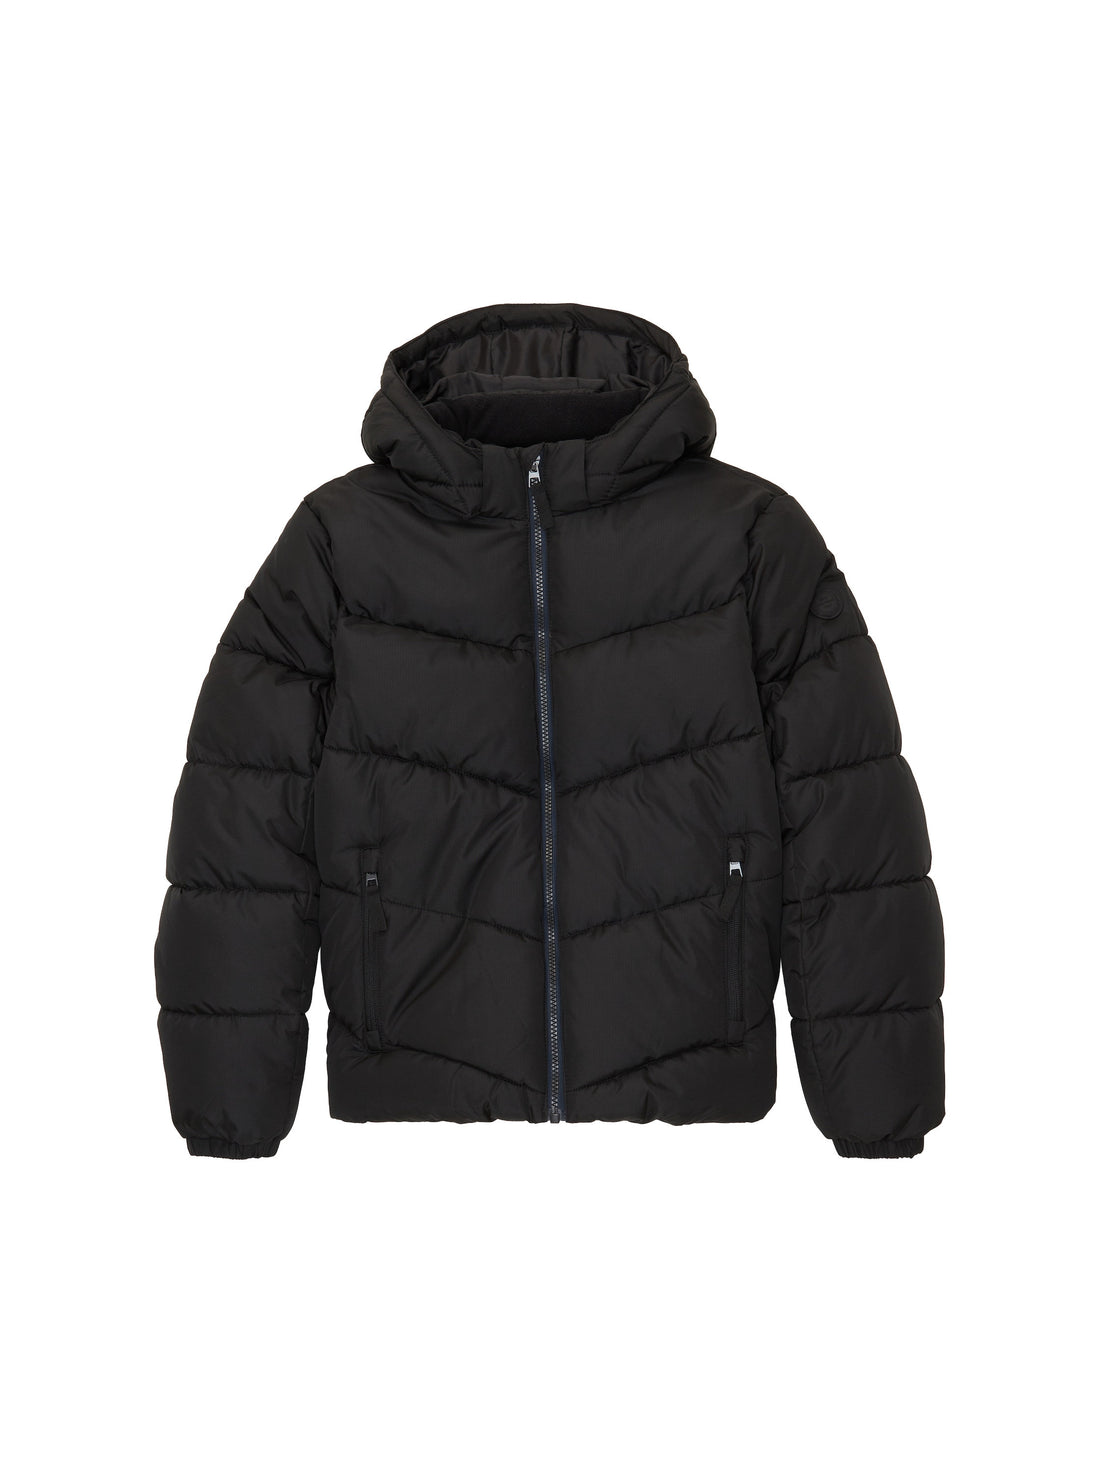 Heavy Puffer Jacket With Hood_1038540_29999_01